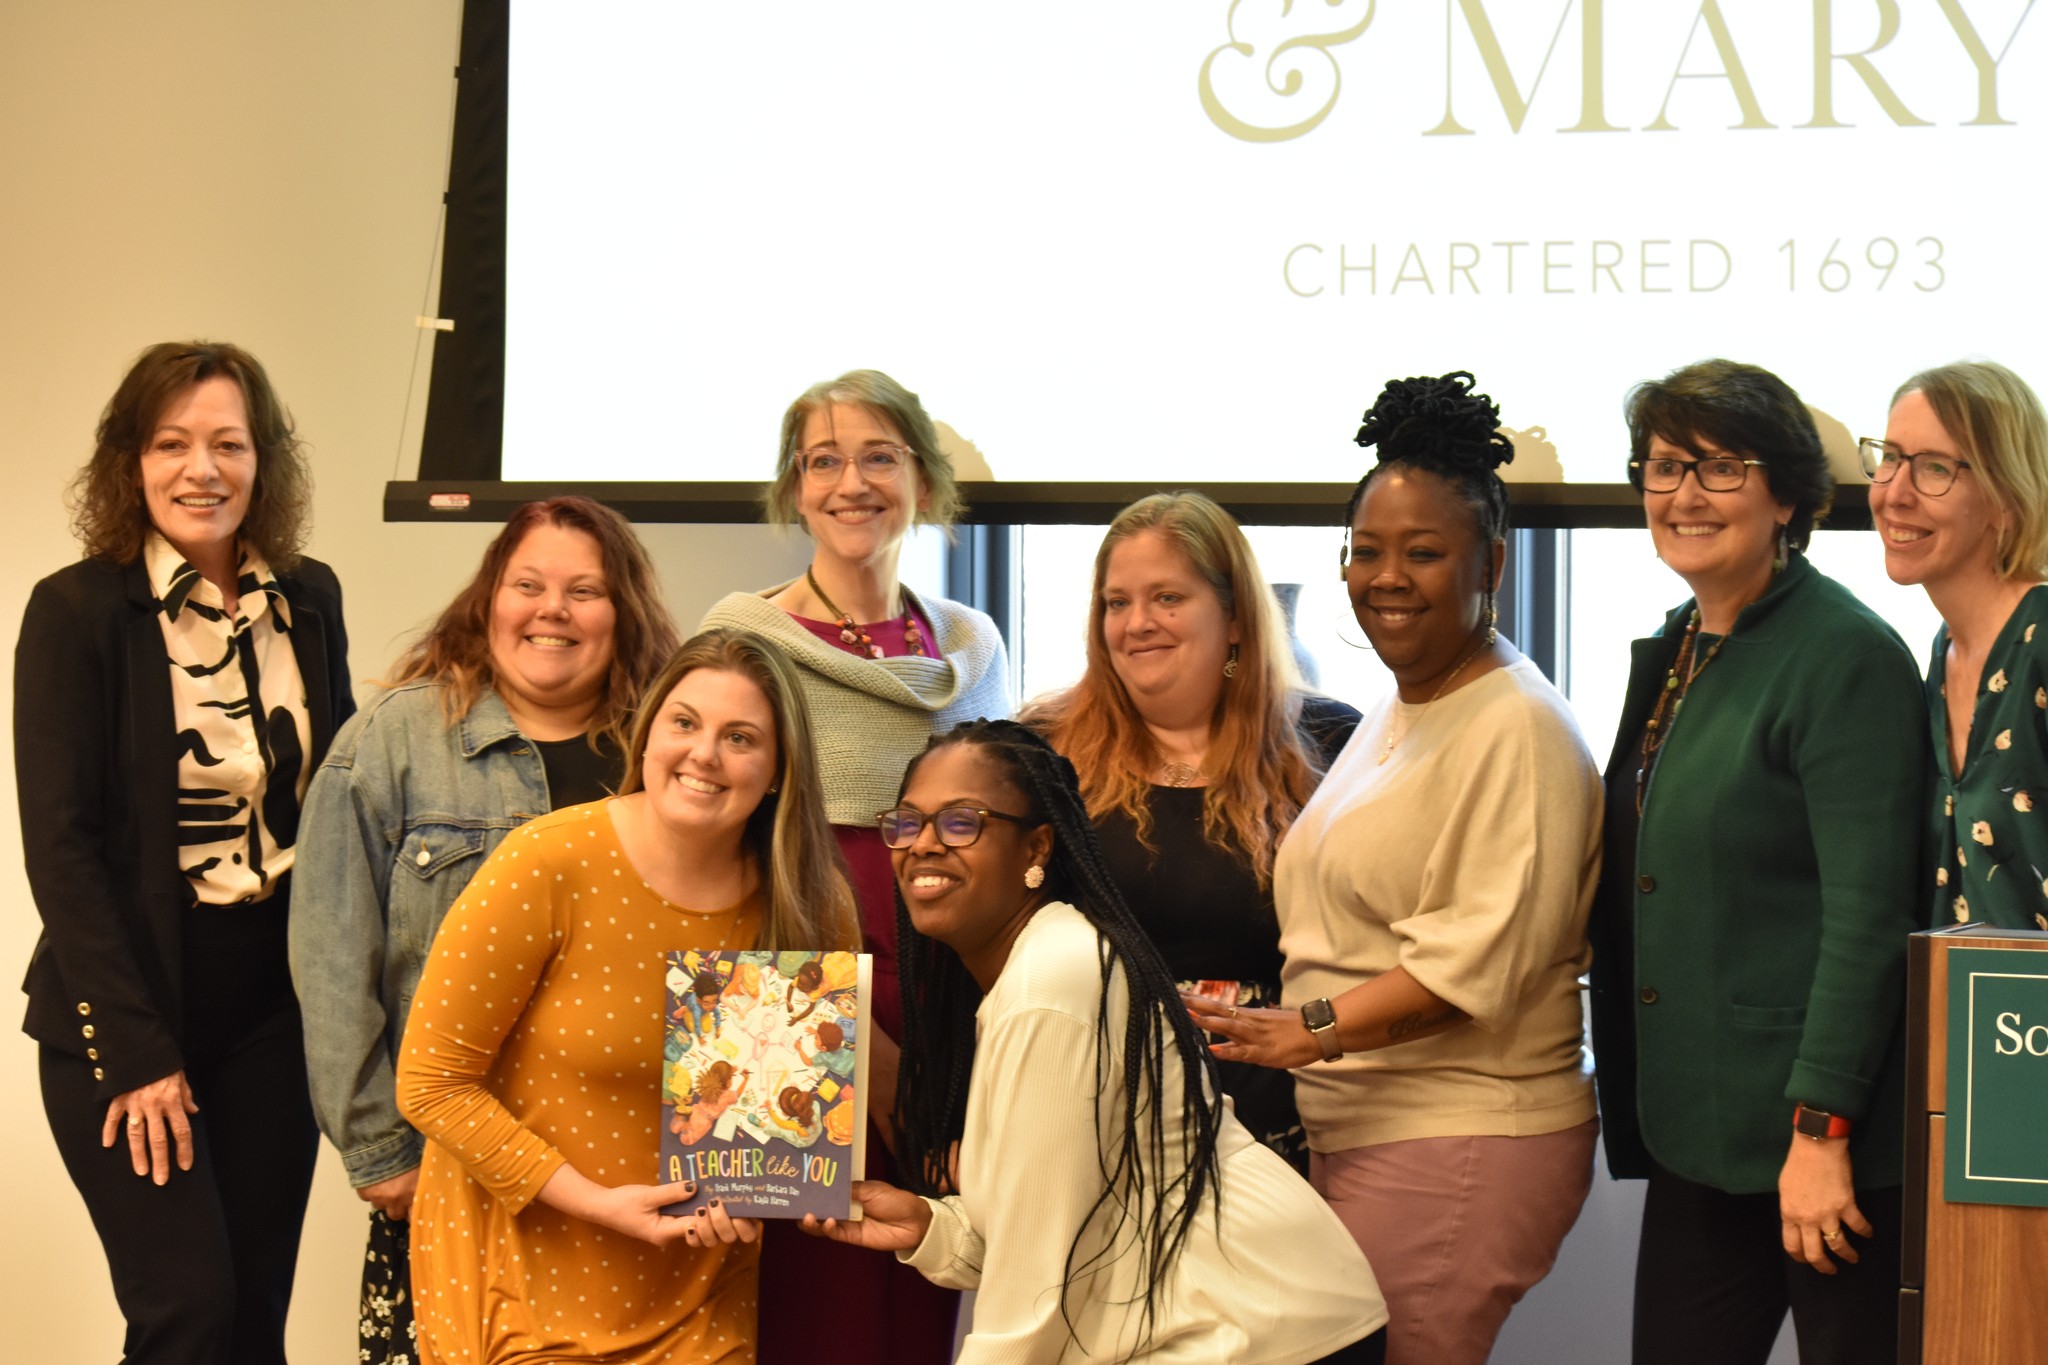 Denise Johnson (left), Kristin Conradi Smith (far right), and Tamara Williams (second from right) join a small group of the cohort for a picture.